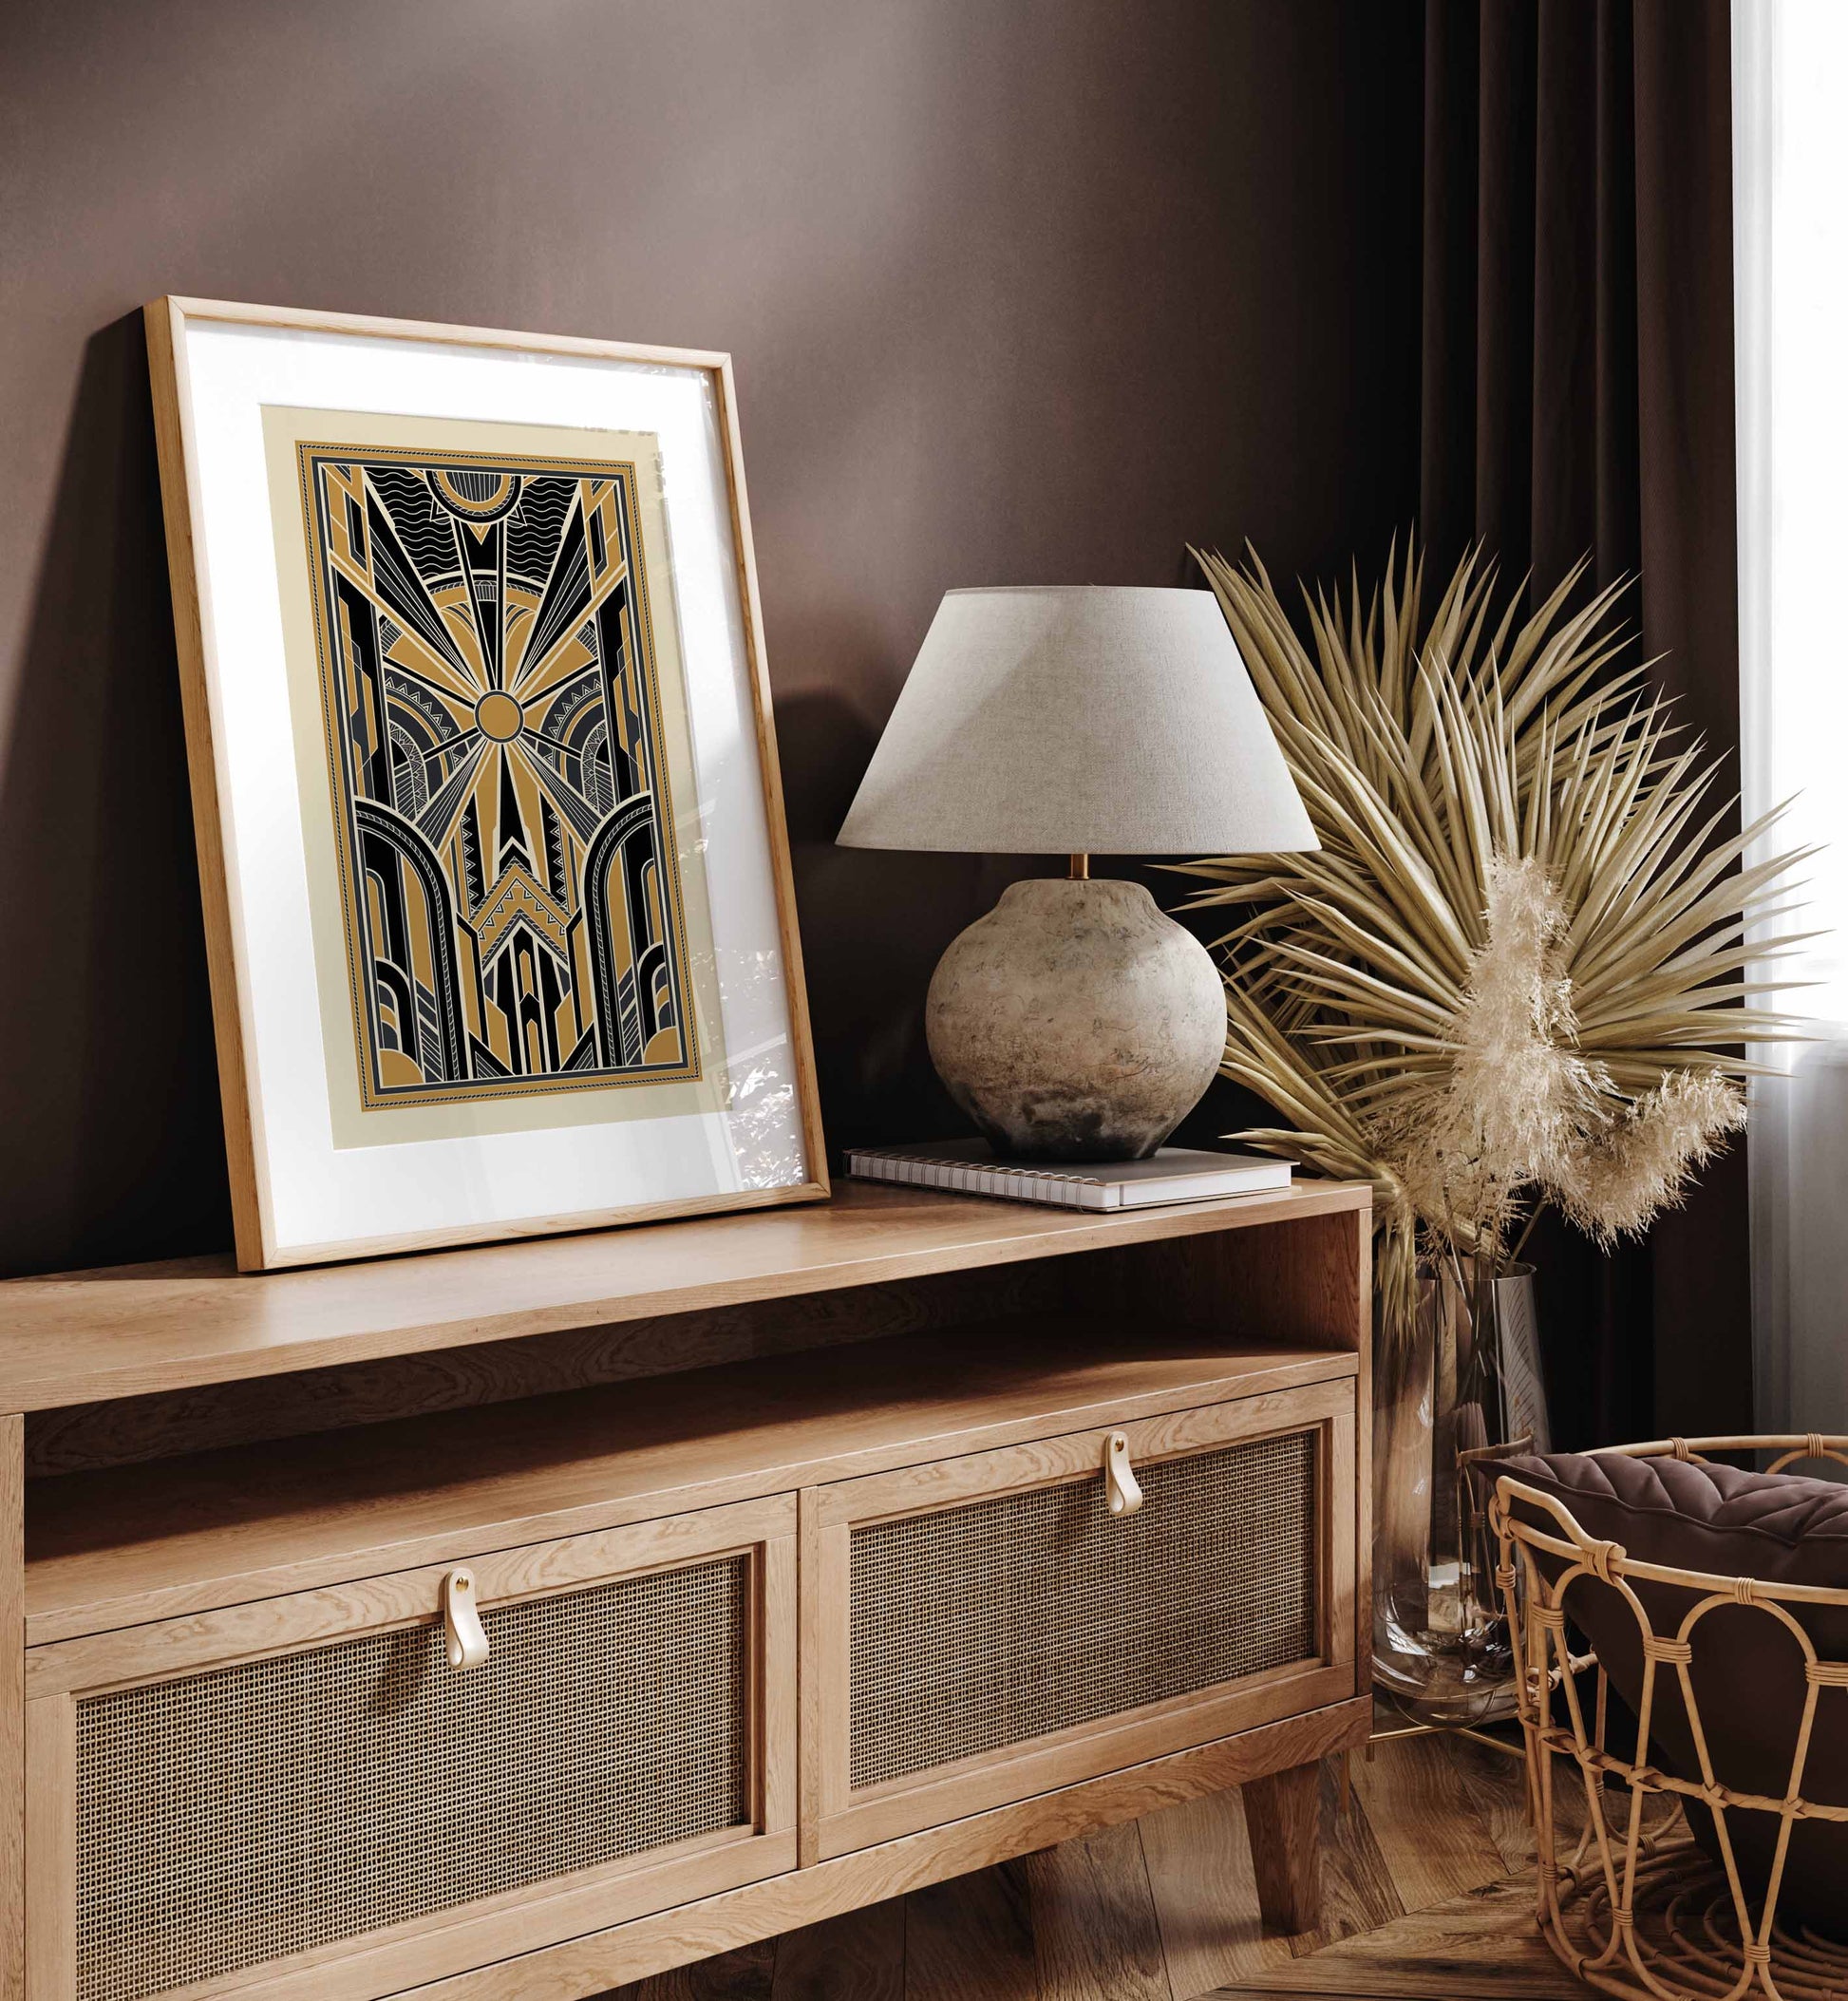 Art deco print with a geometric style pattern in gold and black